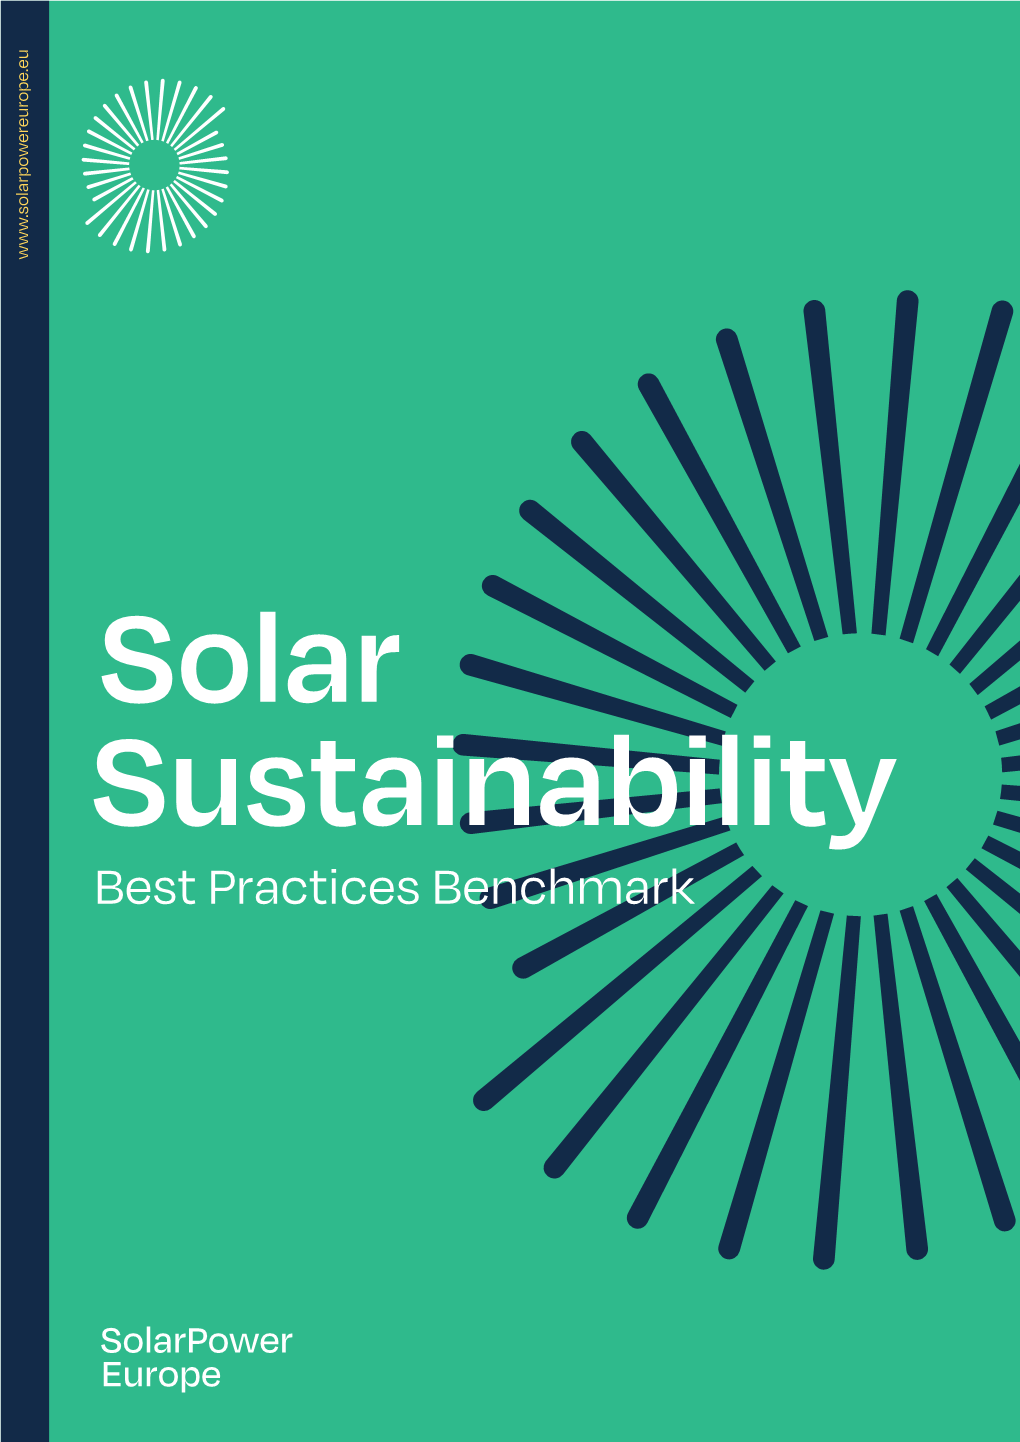 Solar Sustainability Best Practices Benchmark Join 200+ Solarpower Europe Members